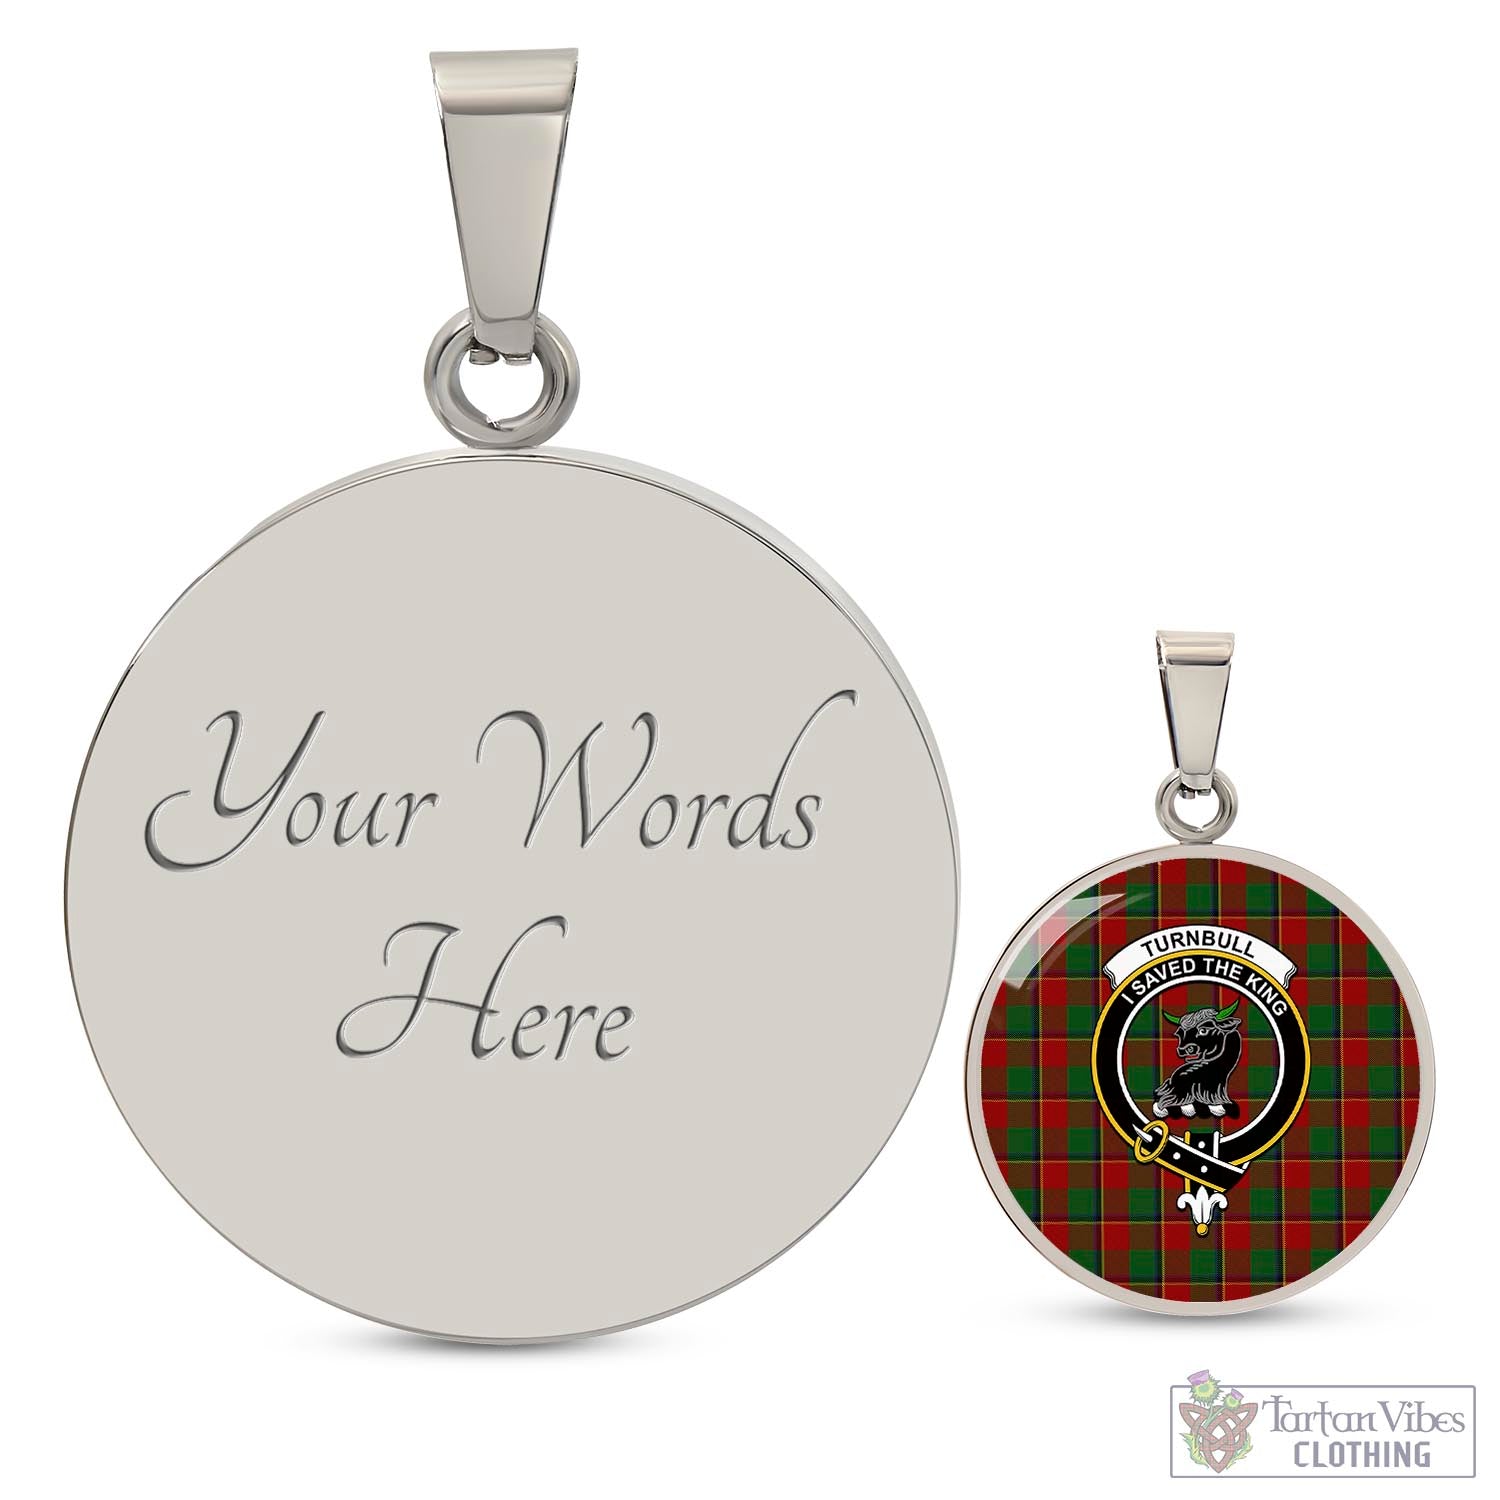 Tartan Vibes Clothing Turnbull Dress Tartan Circle Necklace with Family Crest